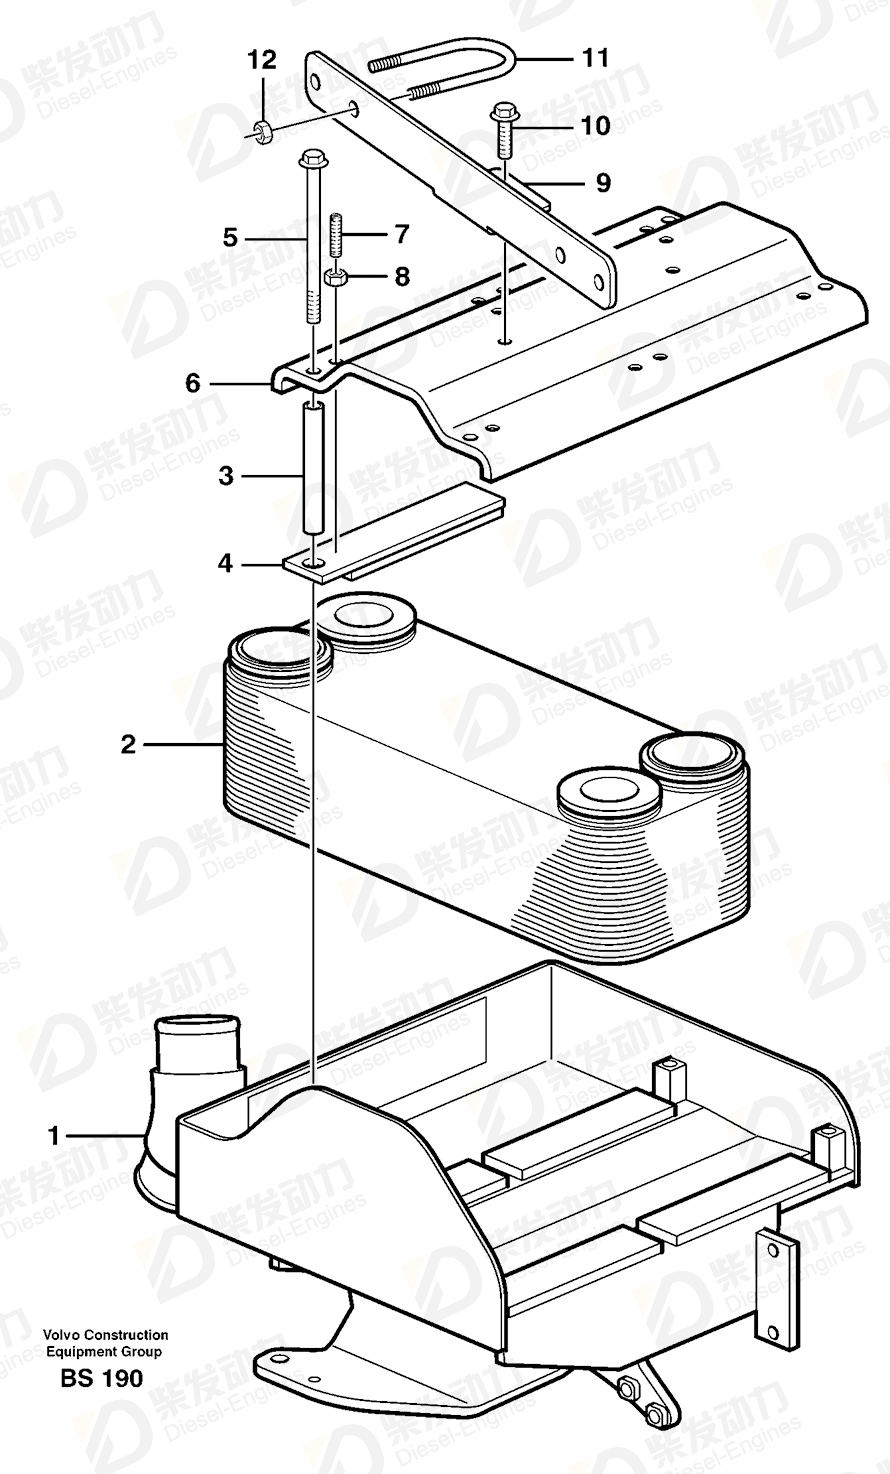 VOLVO Tensioning plate 11113601 Drawing